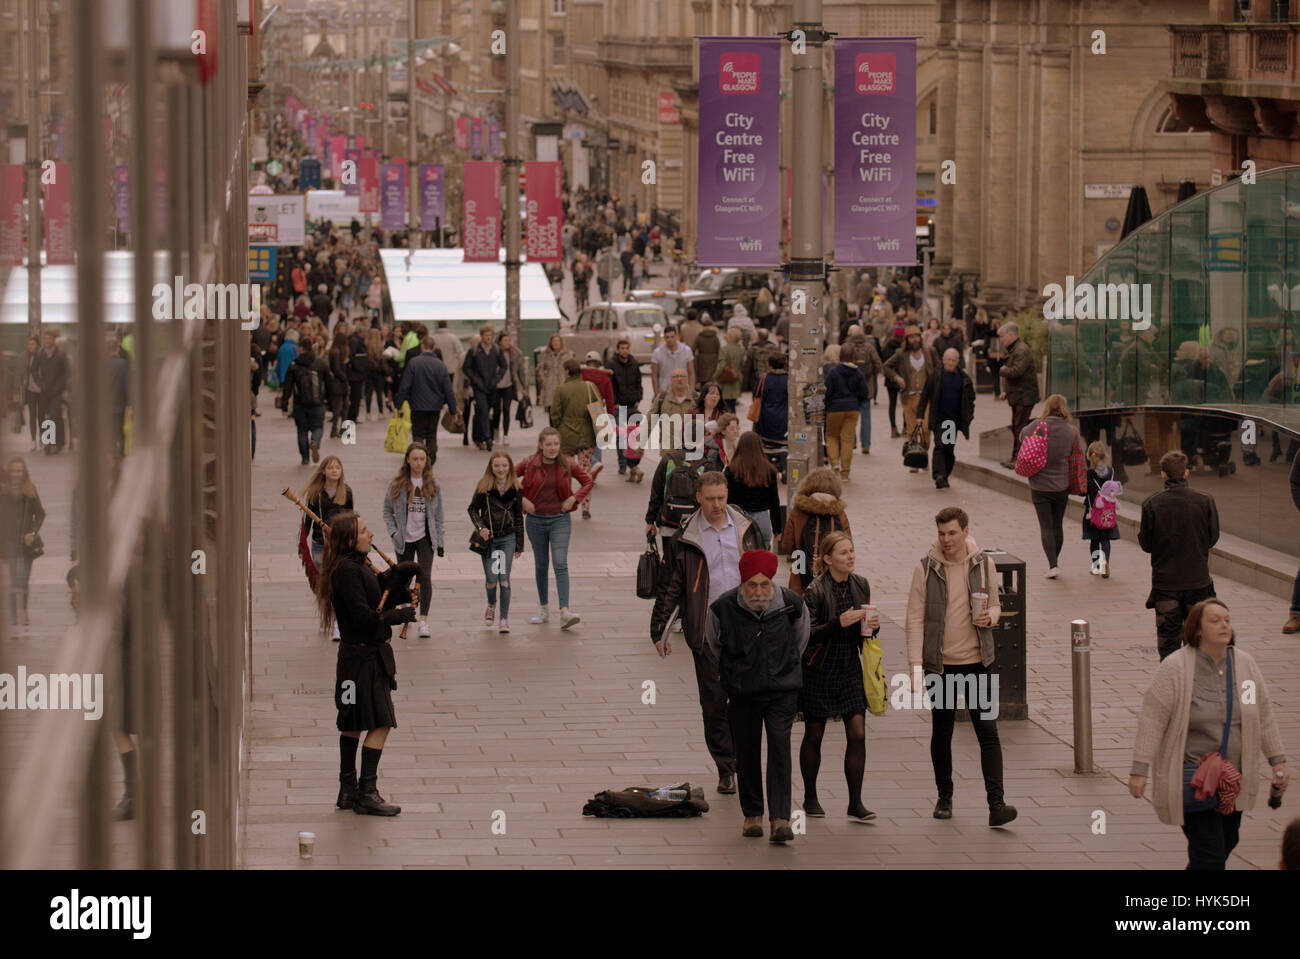 shoppers and tourists shopping in crowds om Buchanan street Glasgow Stock Photo